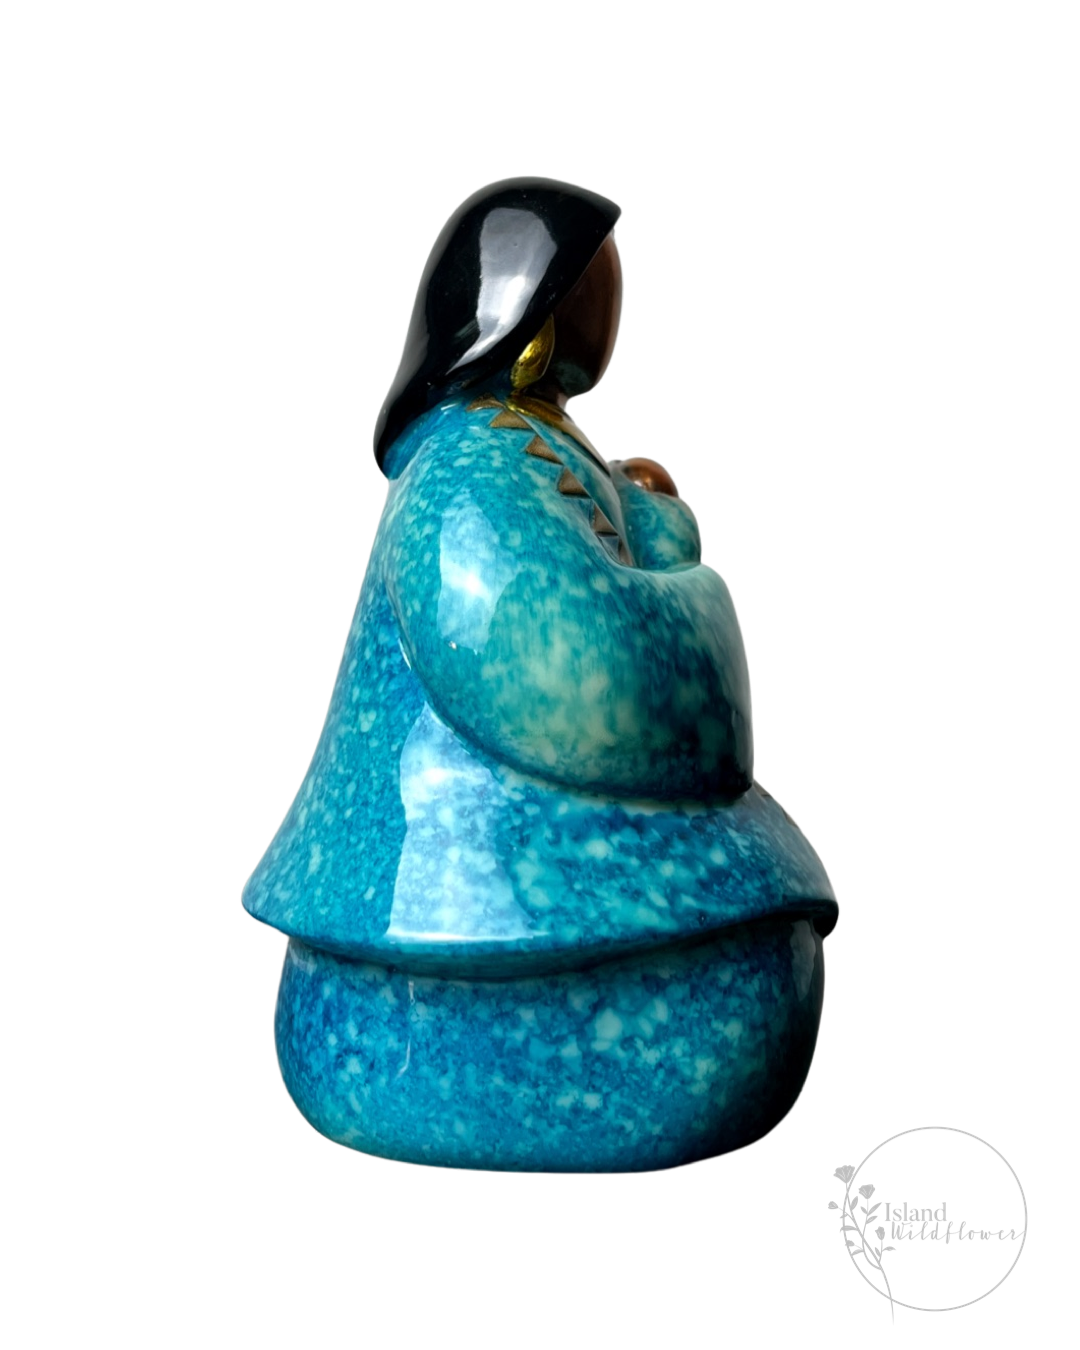 Native American Mother and Child Figurine in Speckled Blue Ceramic with Bronze Faces and Gold Accents